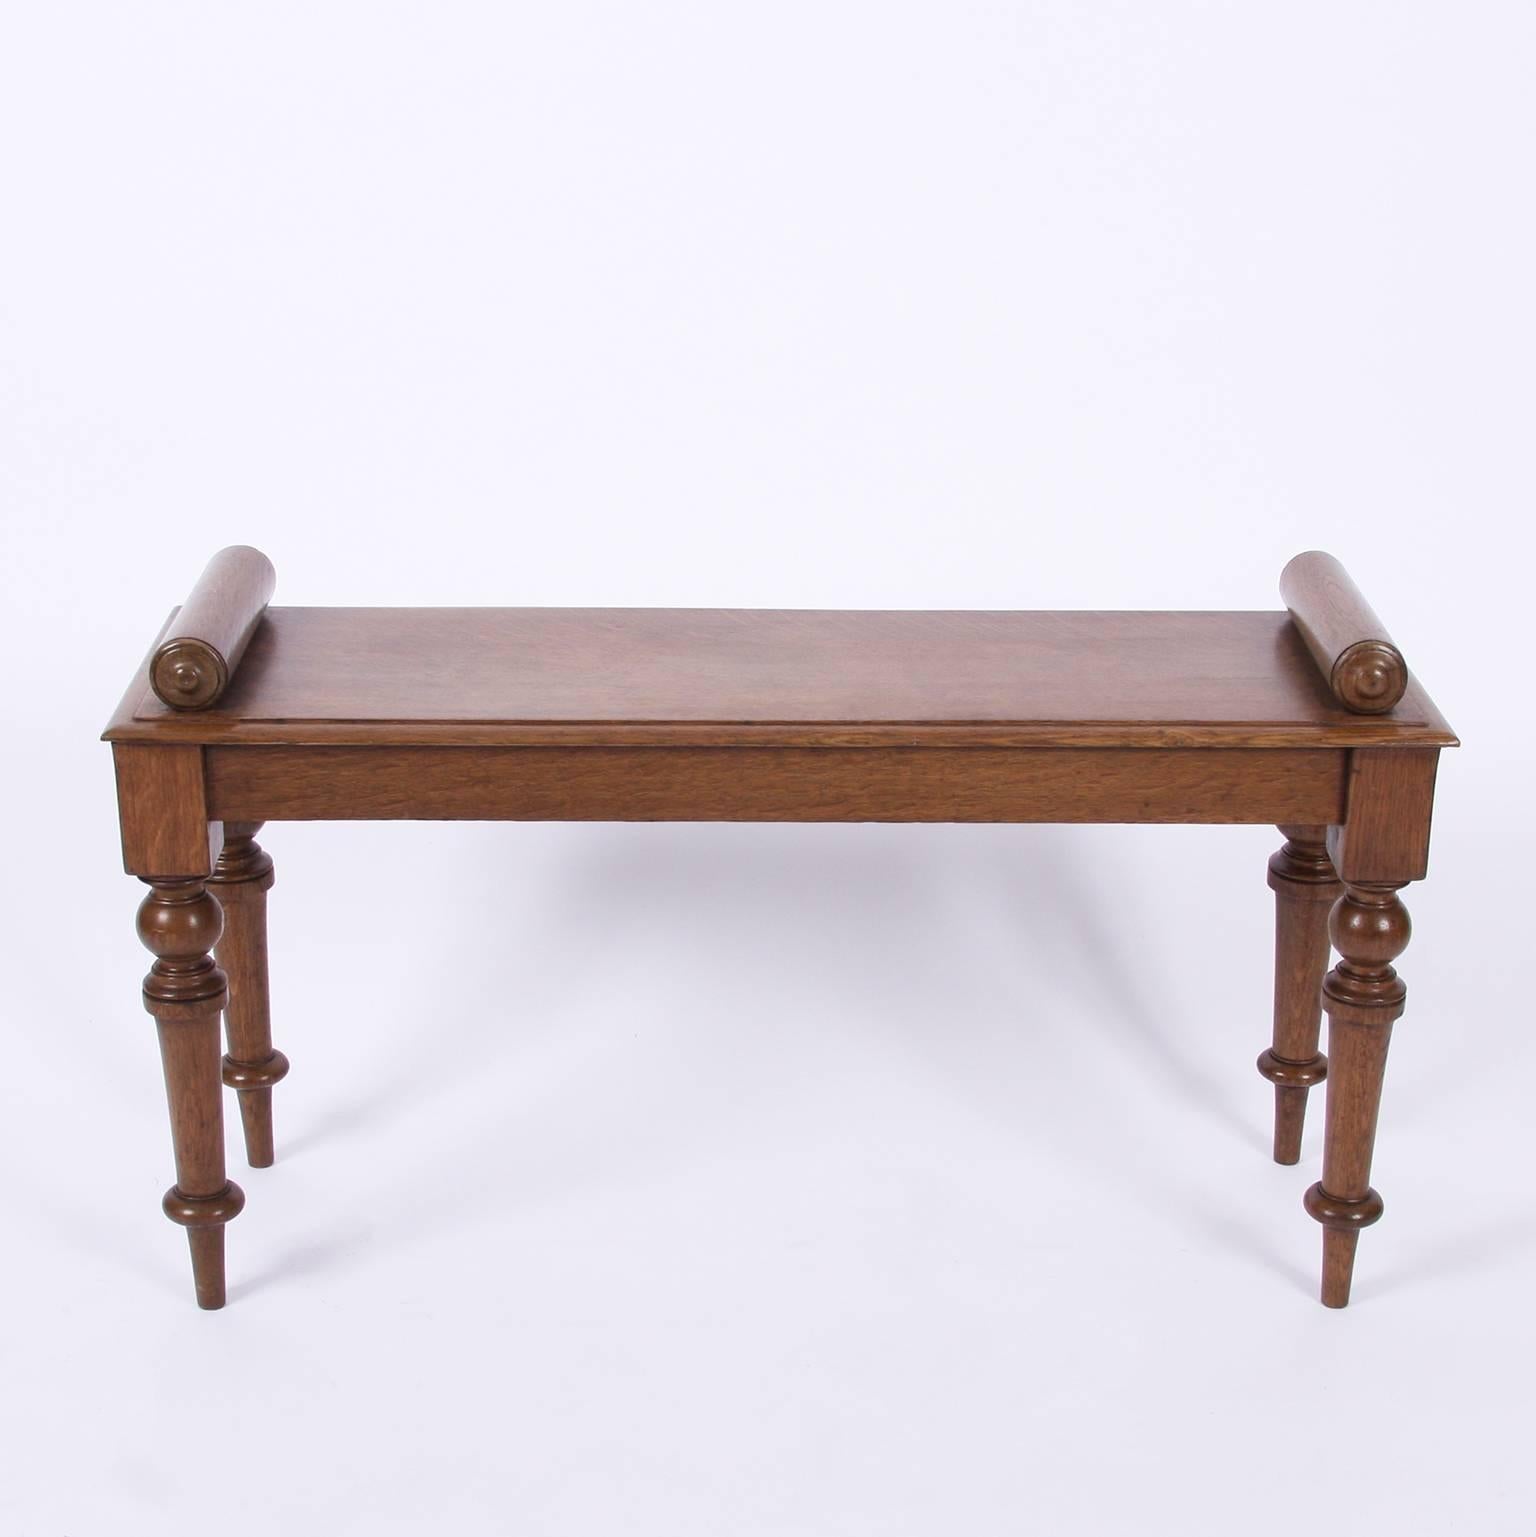 English, 19th century

A charming oak window seat with wooden bolsters.